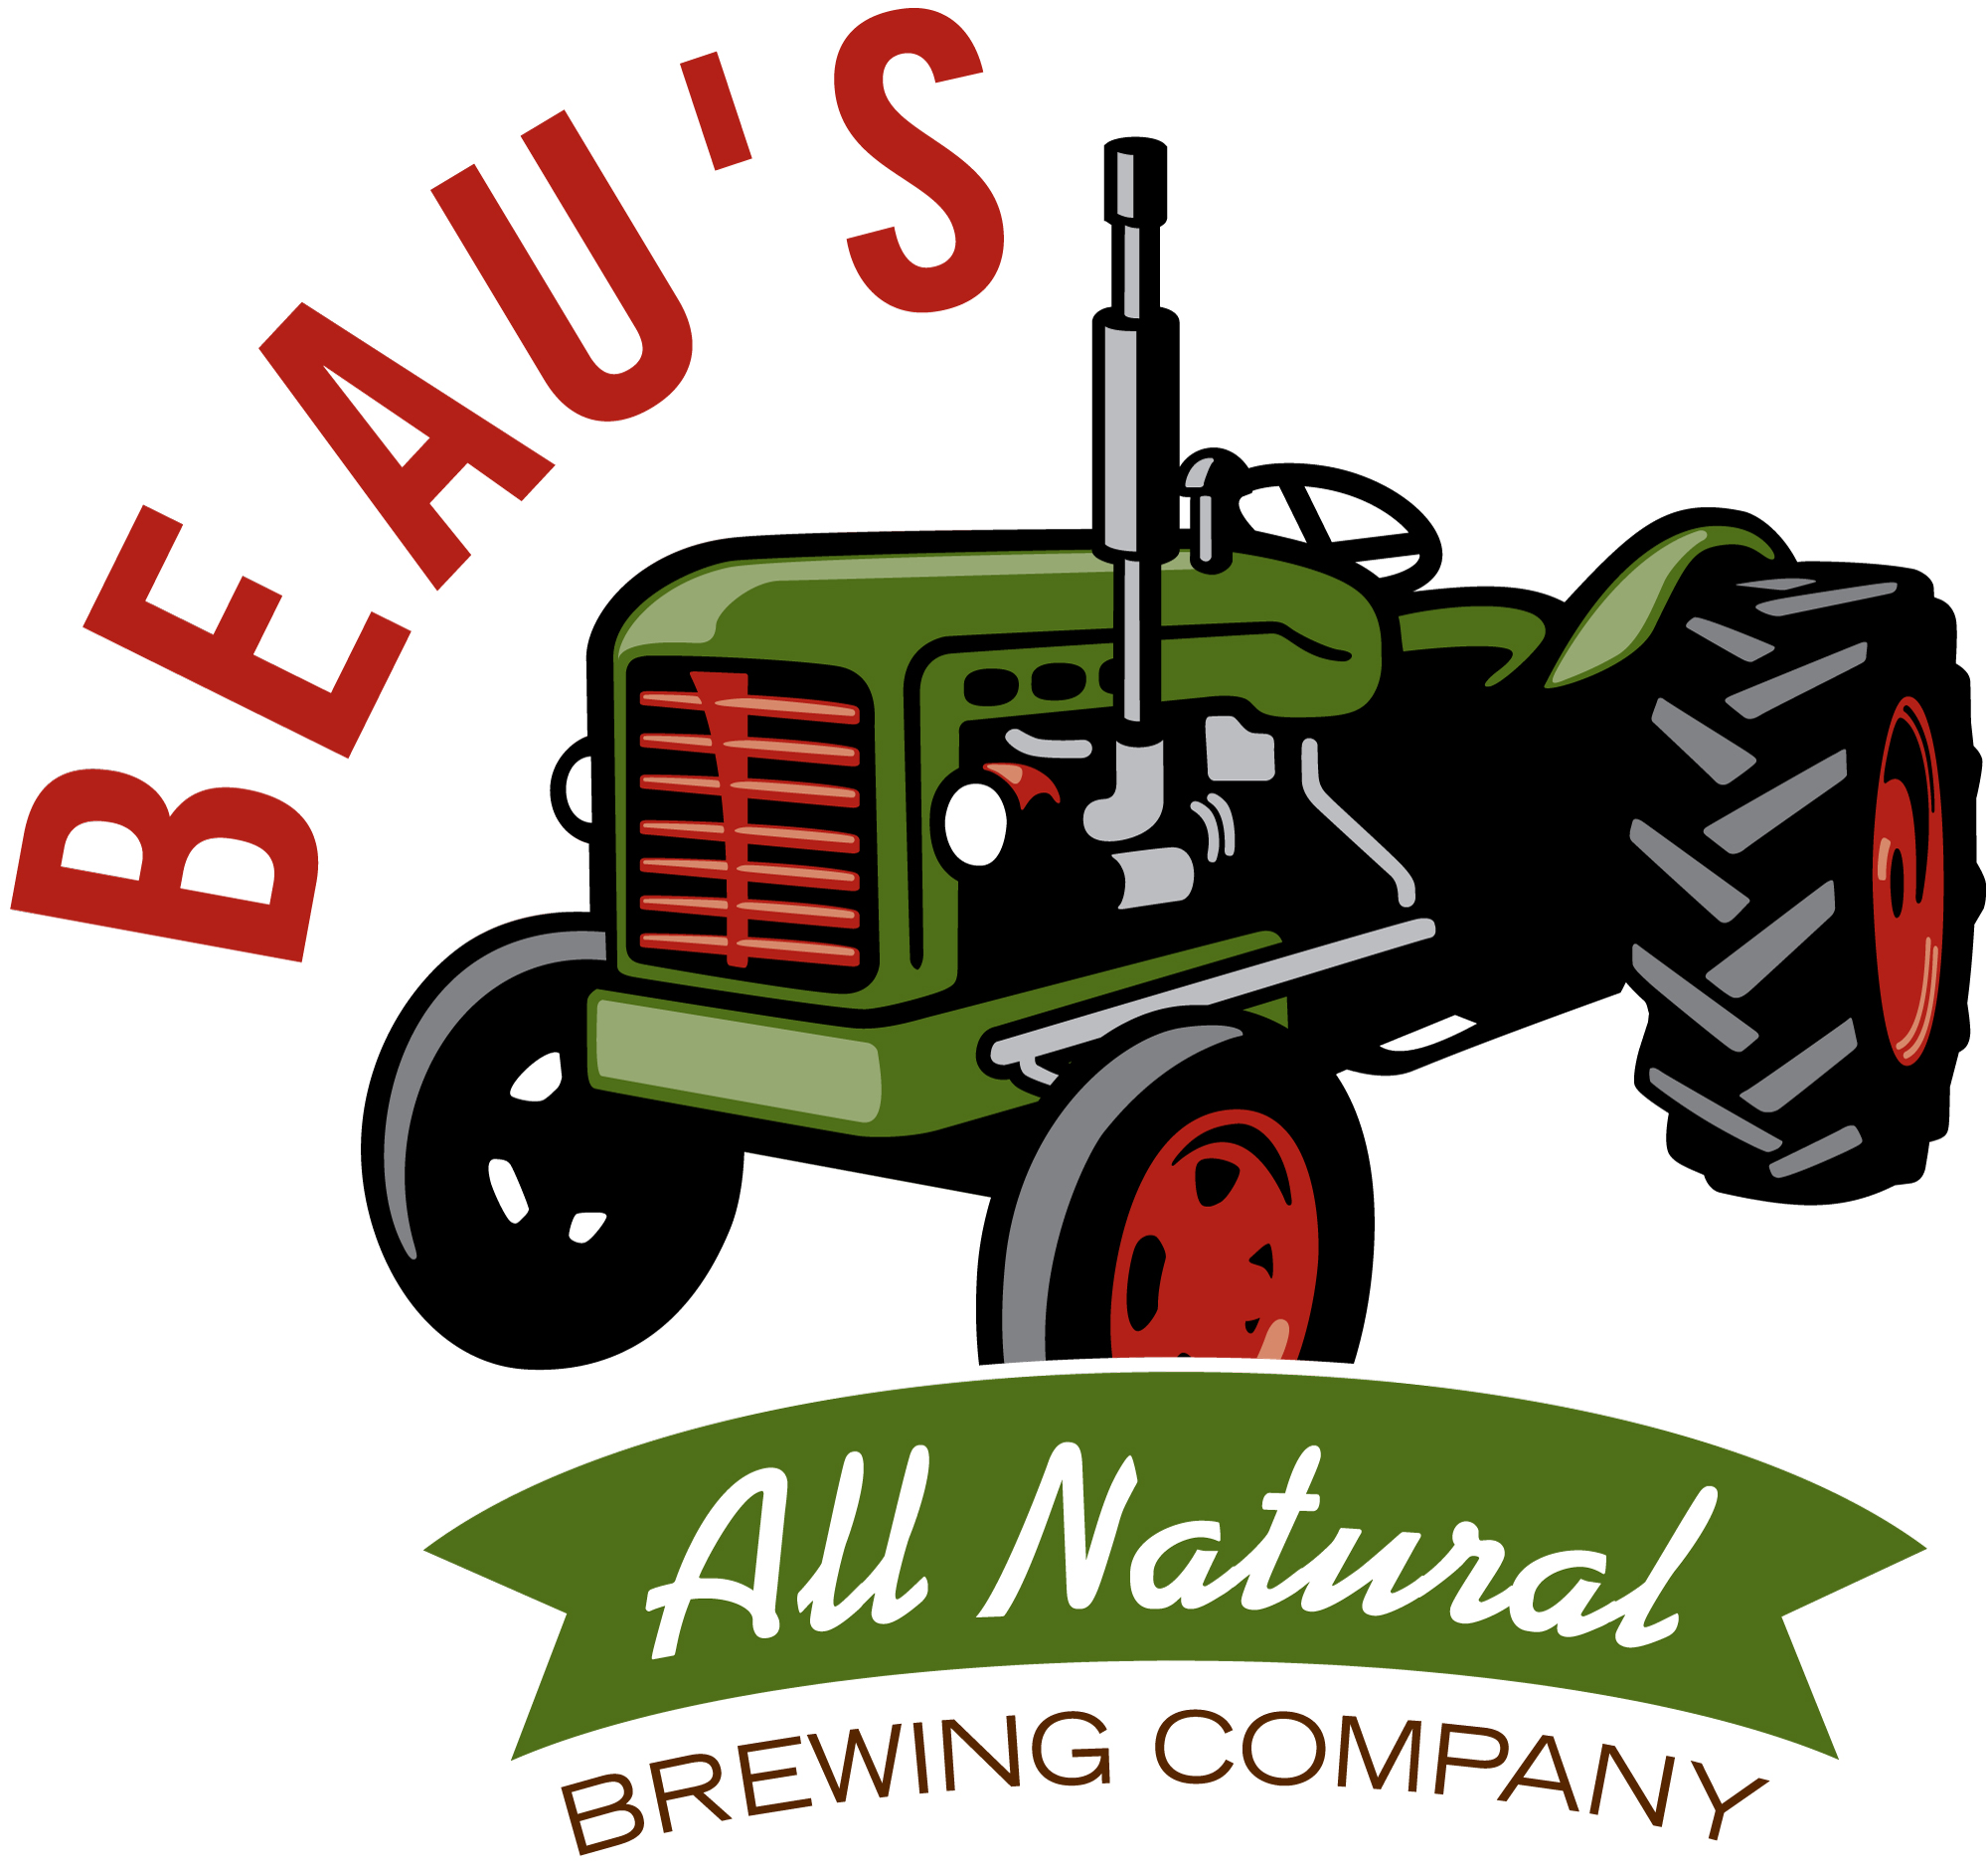 Beau's All Natural Brewing Company jobs